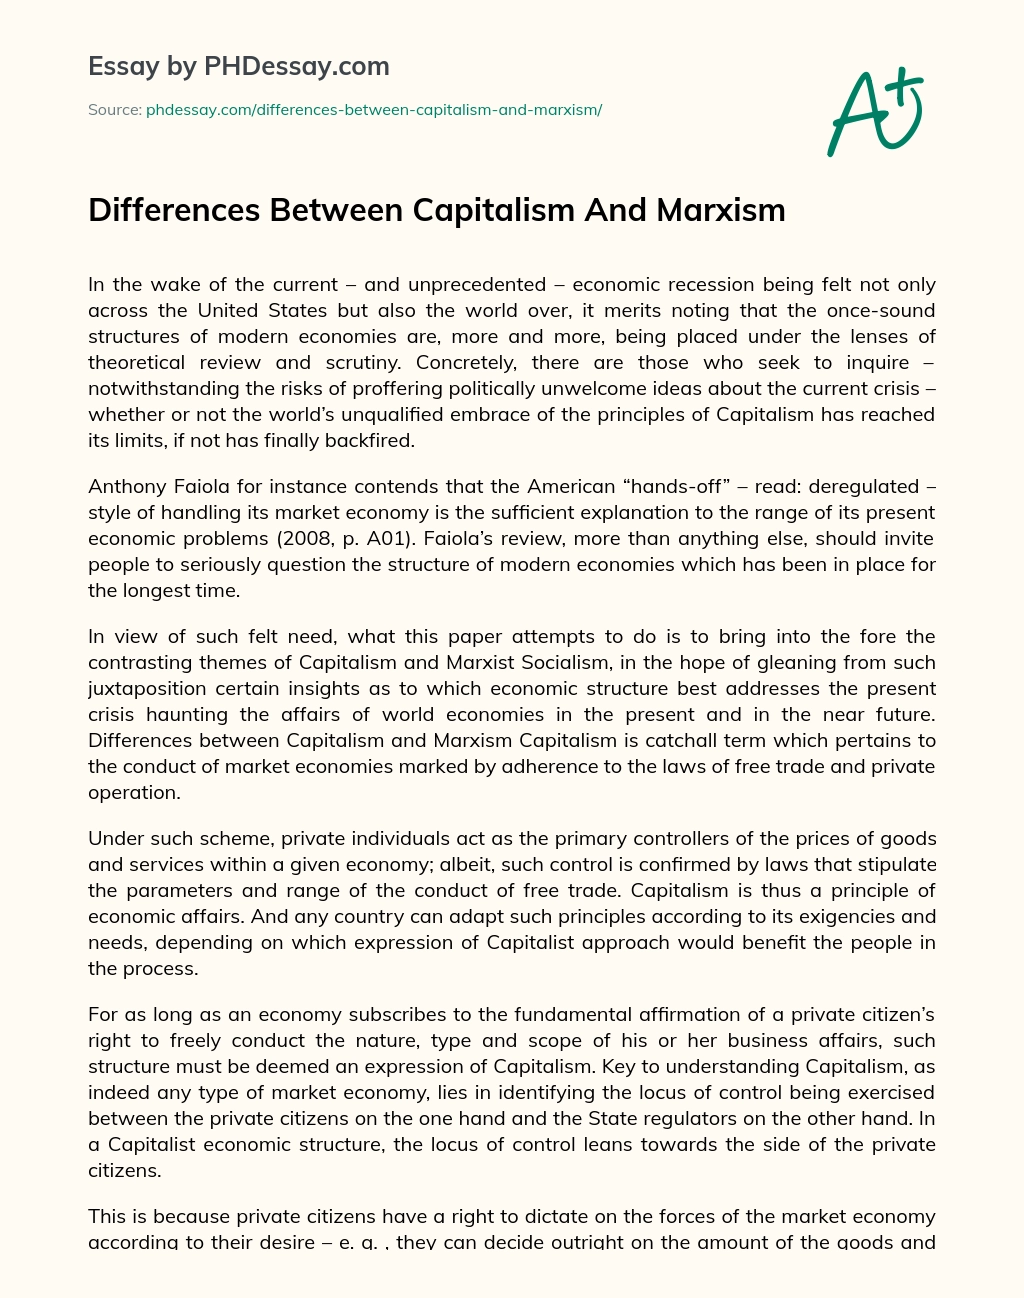 Differences Between Capitalism And Marxism essay